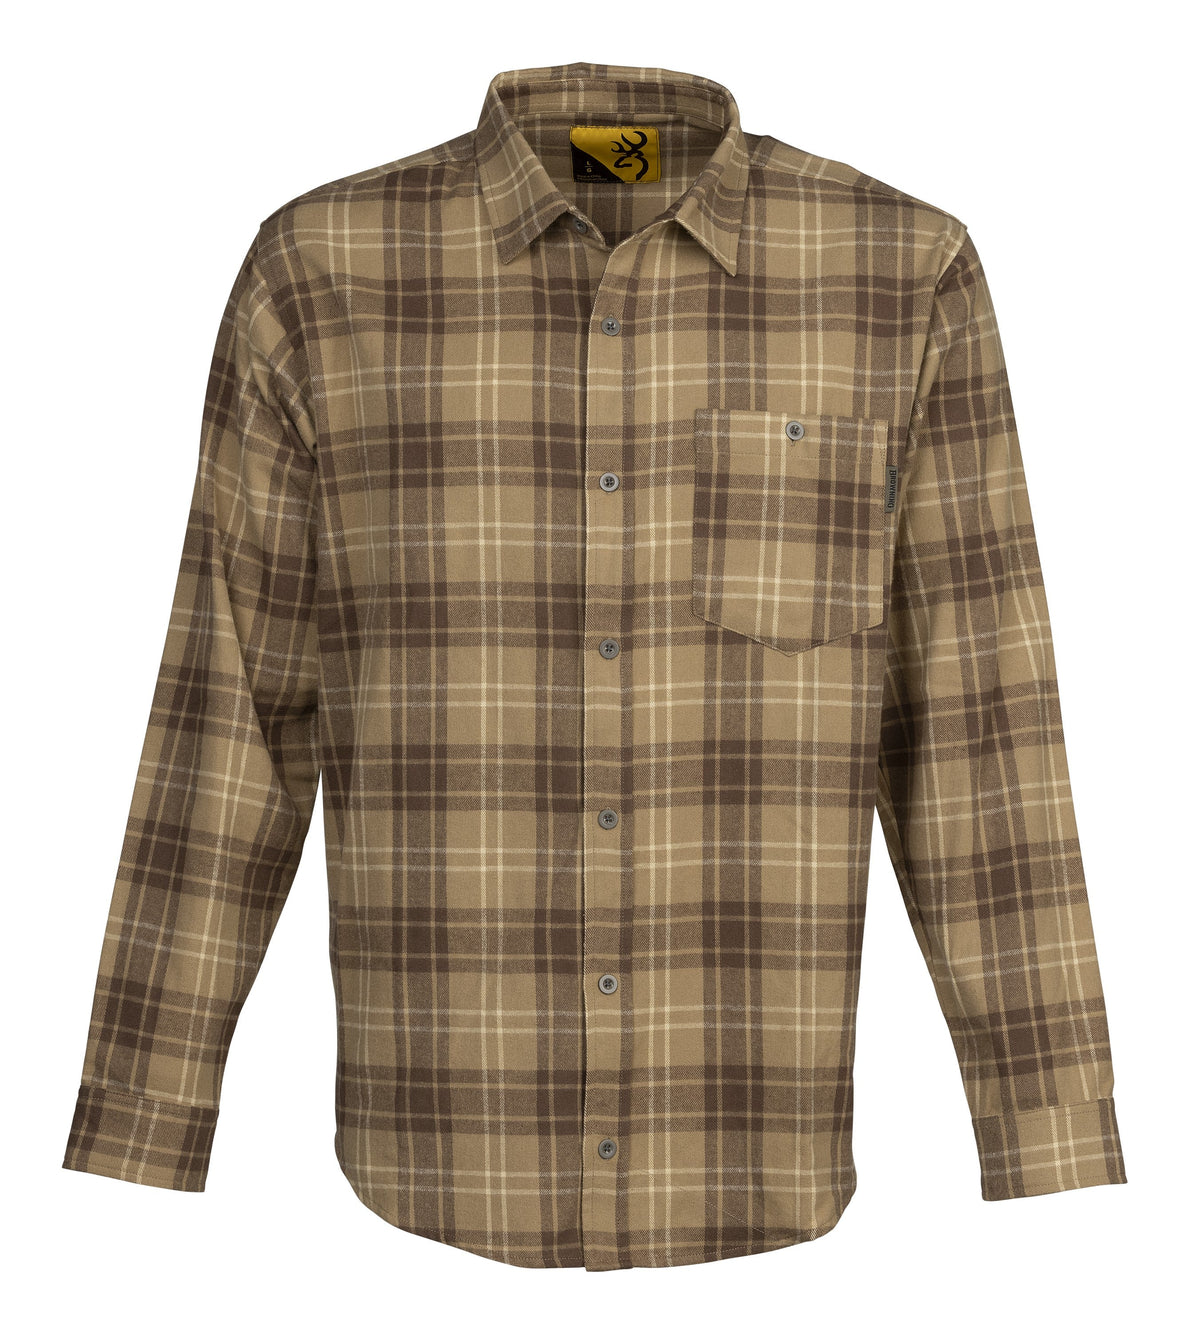 SHT,UPLAND FLANNEL,TAN,S